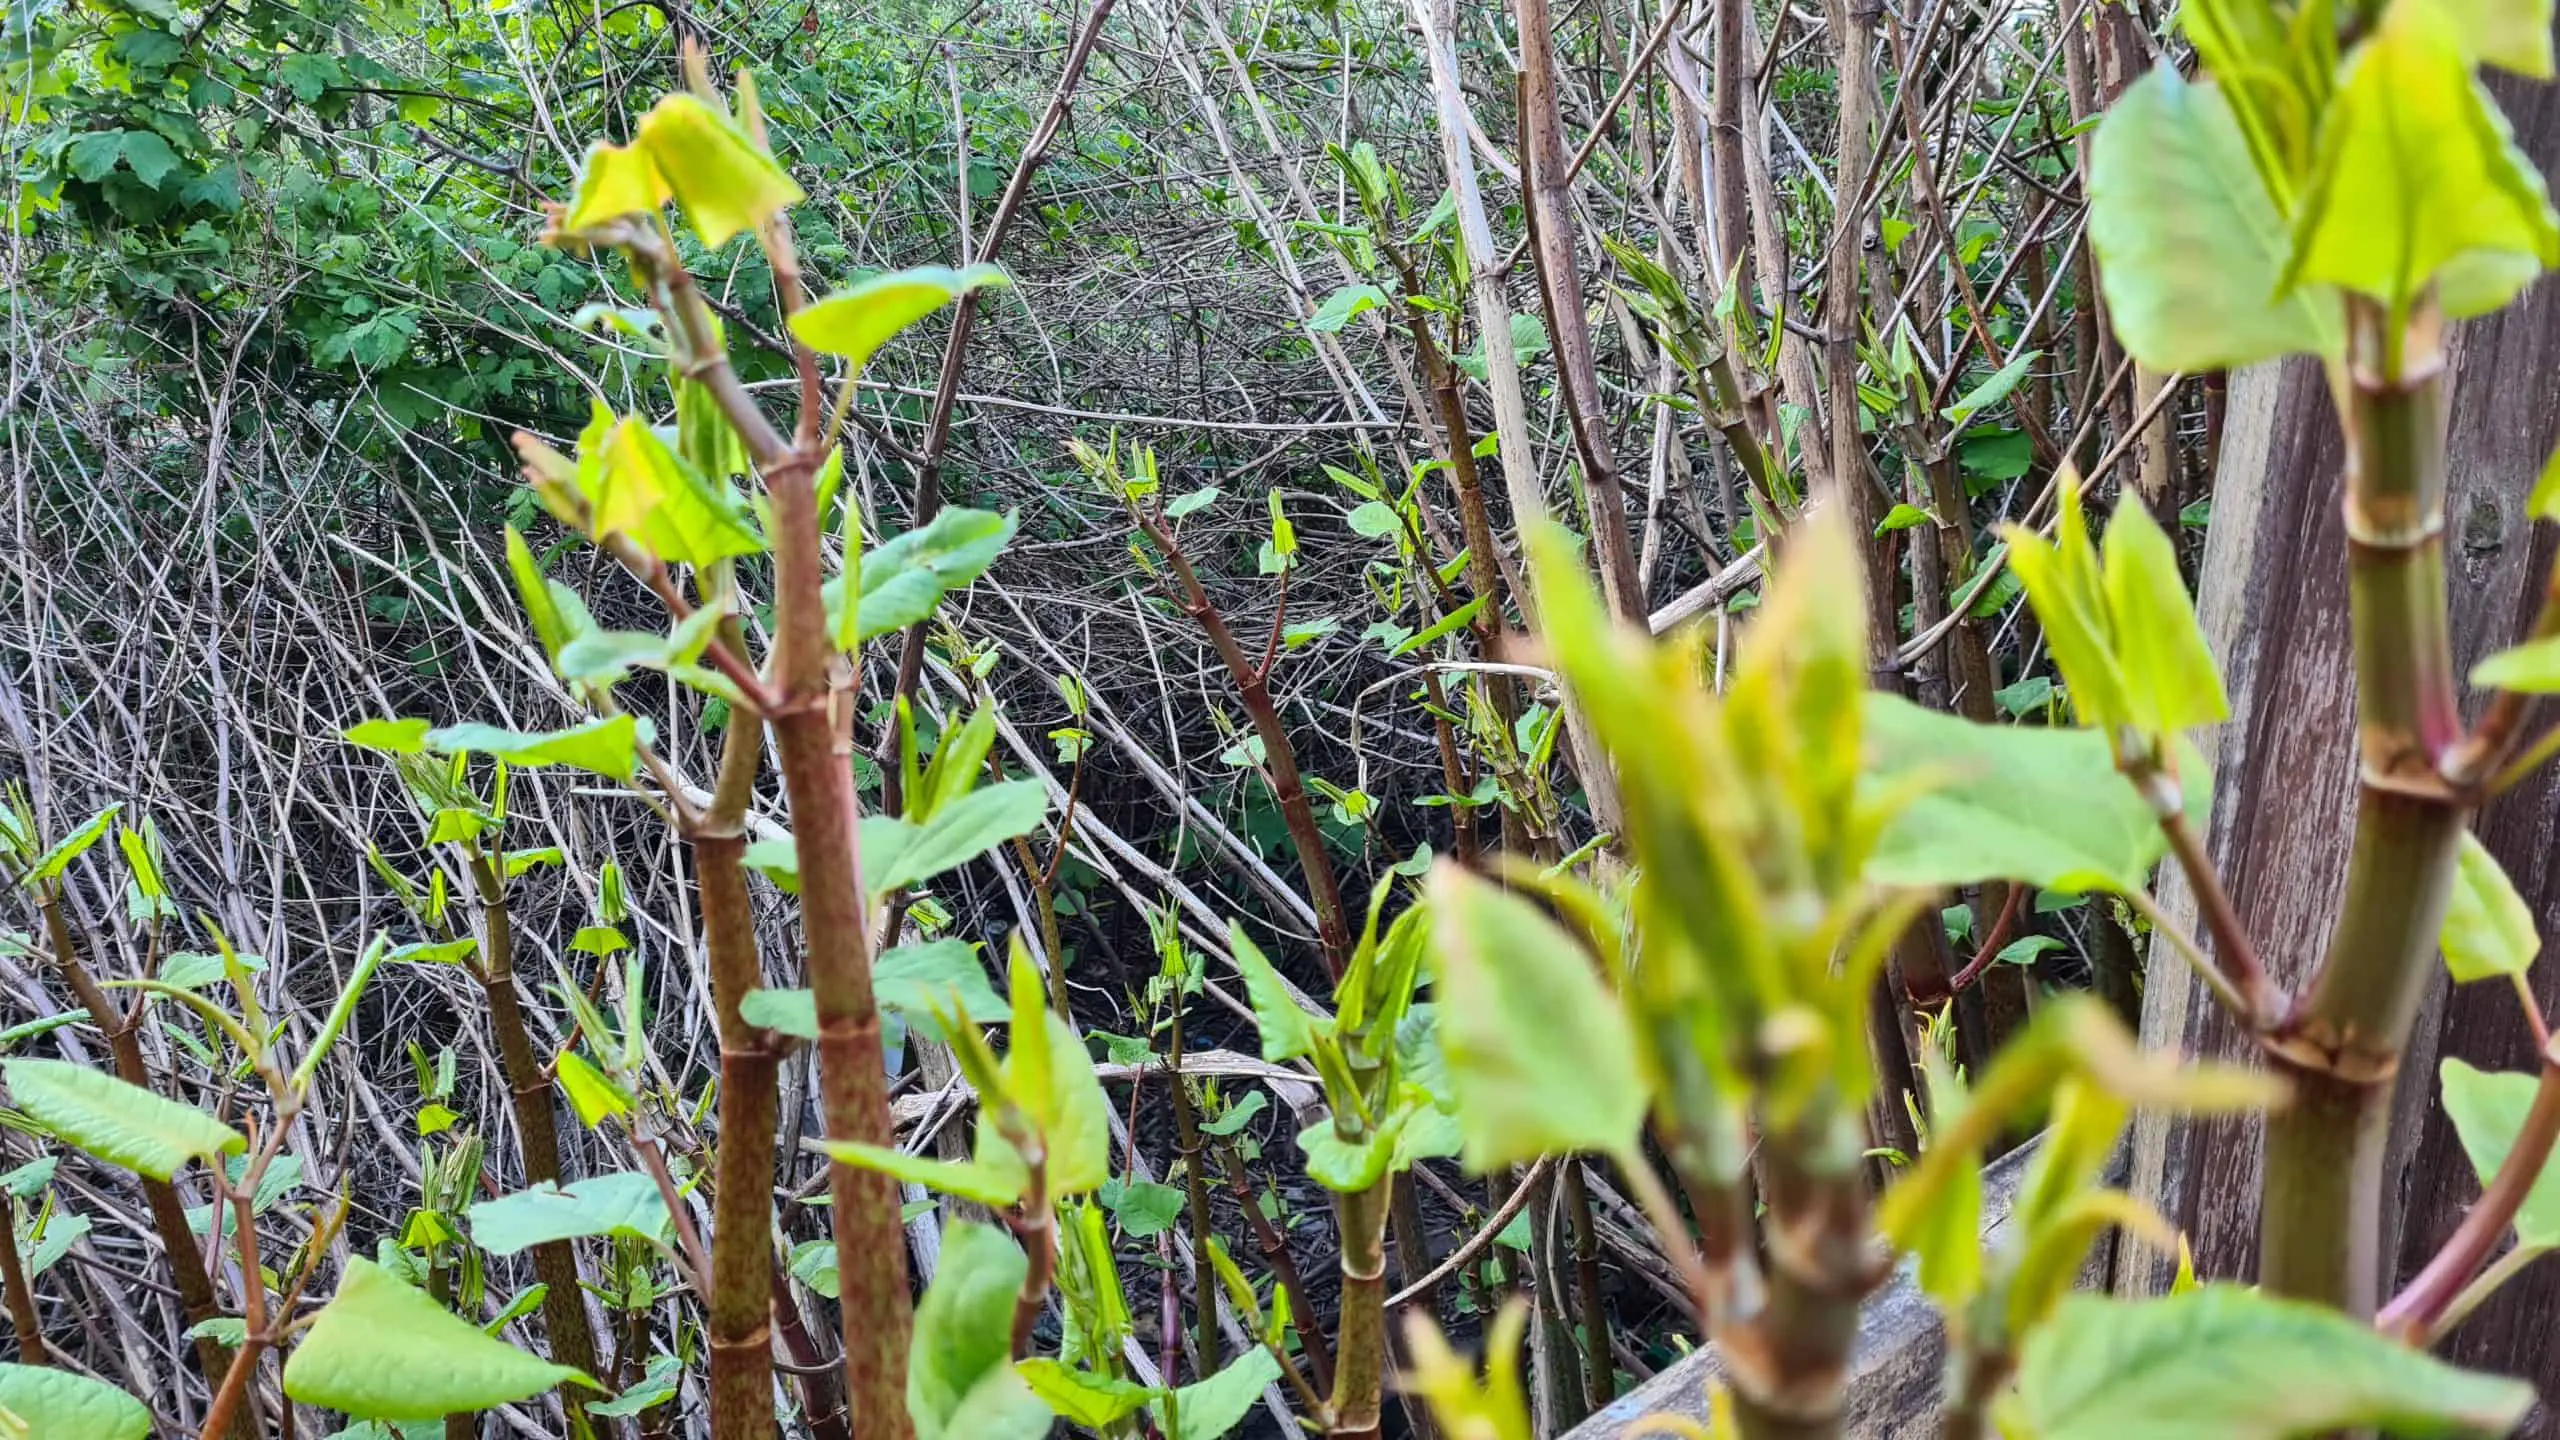 If your neighbour has Japanese knotweed infestation then that can impact your property and cause legal issues